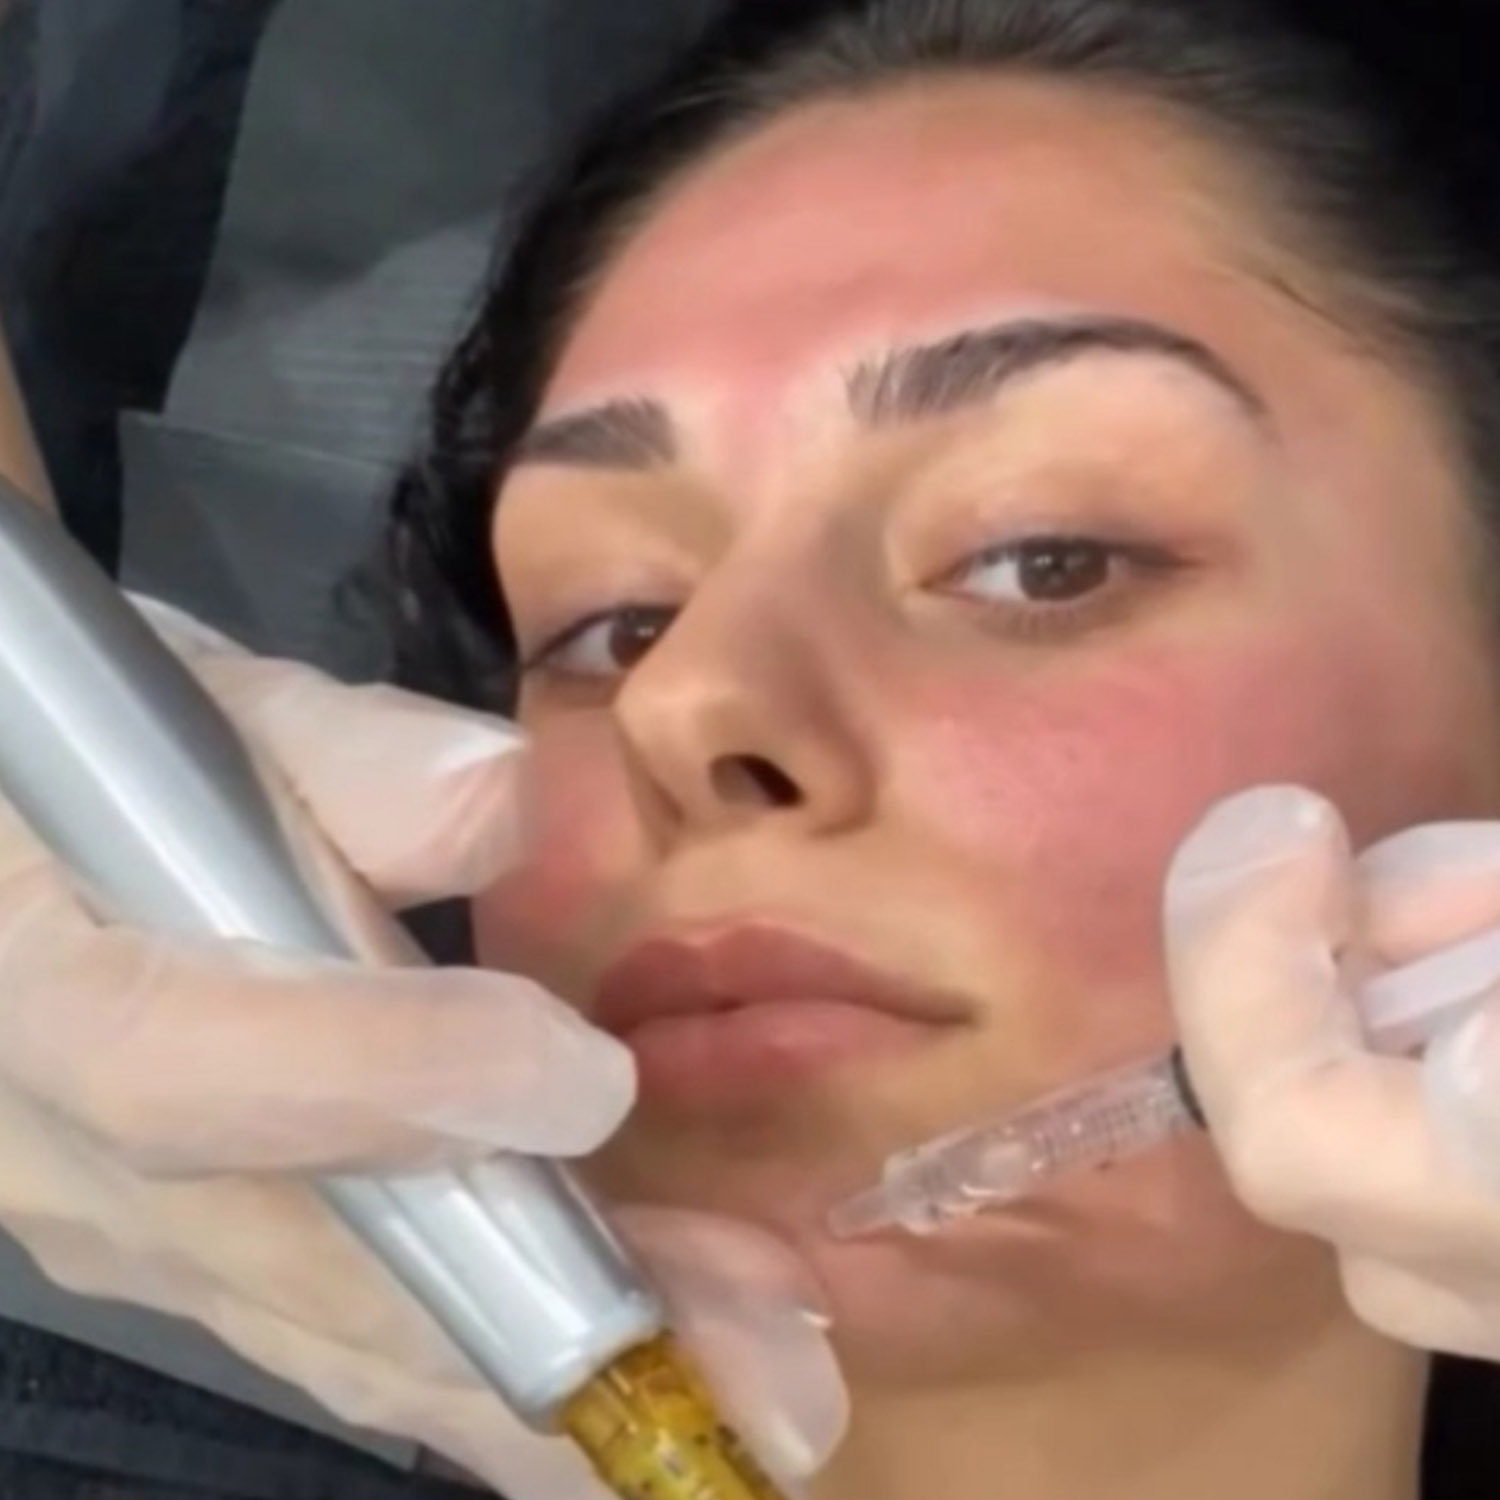 Meso.Prof Ampoule Infusions Treatment at Rejuvenate Laser & Skin Clinic